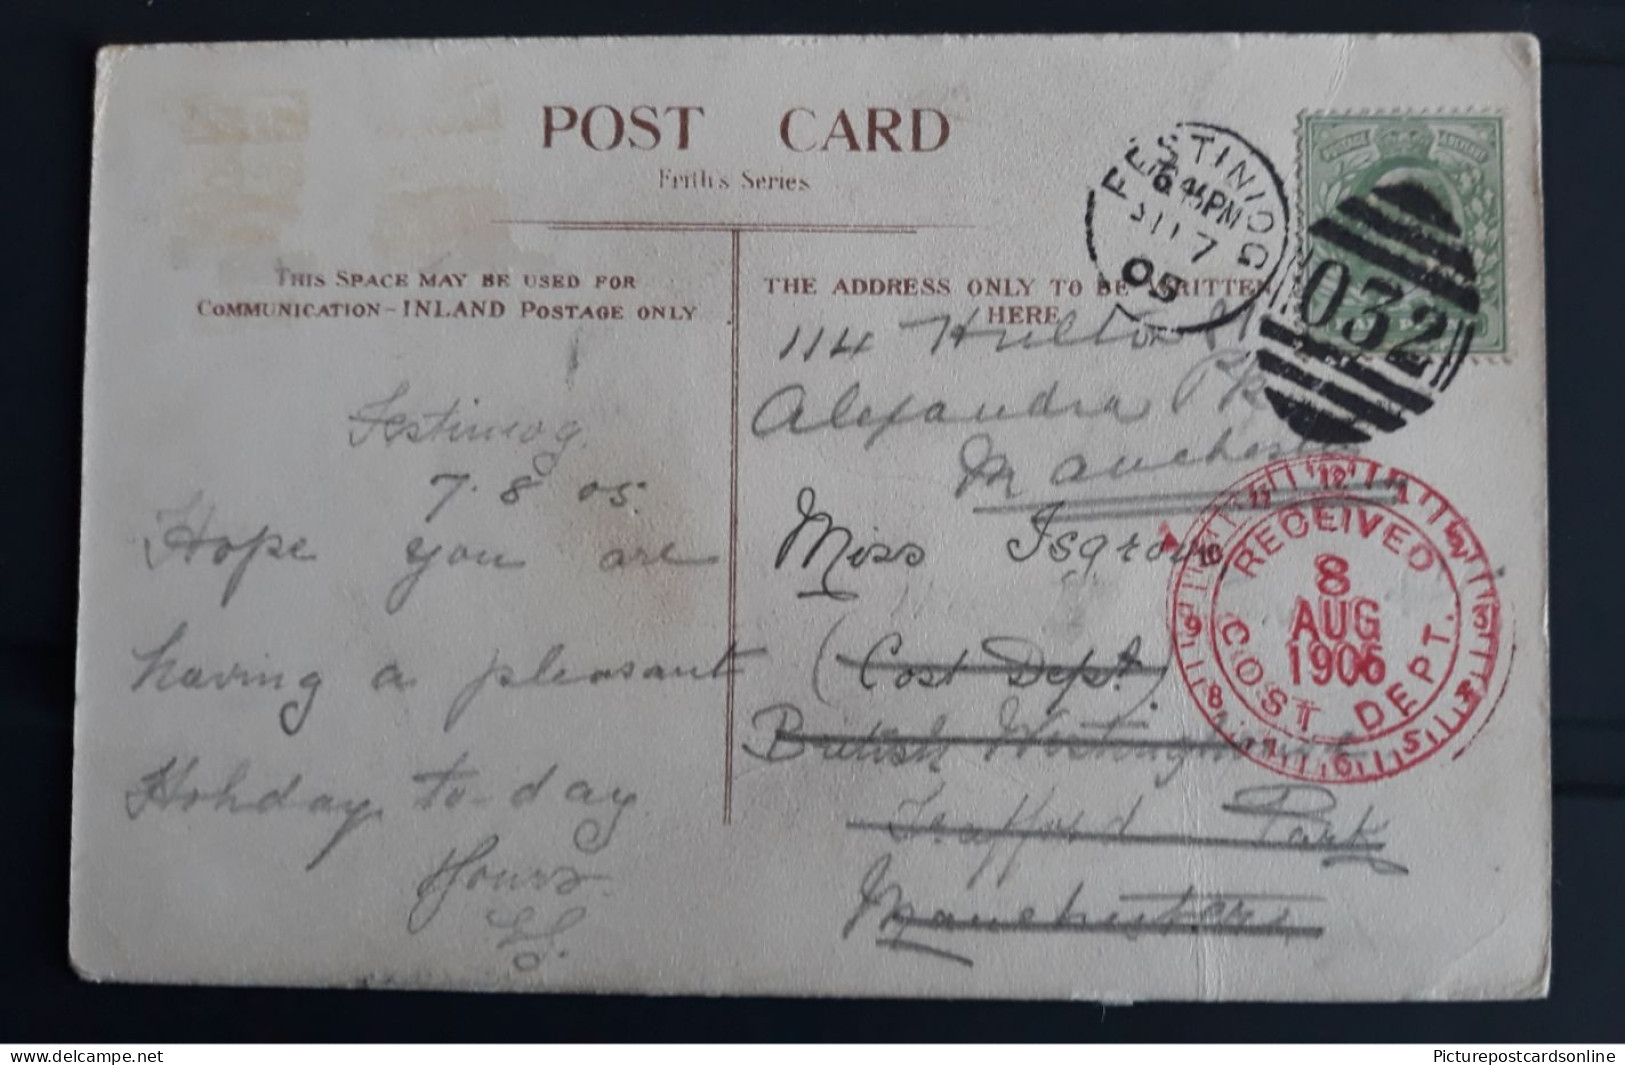 FESTINIOG NUMERAL DUPLEX 032 POSTMARK ON POSTCARD  WITH RECIEVED COST DEPT RED POST 8TH AUGUST 1906 - Unclassified